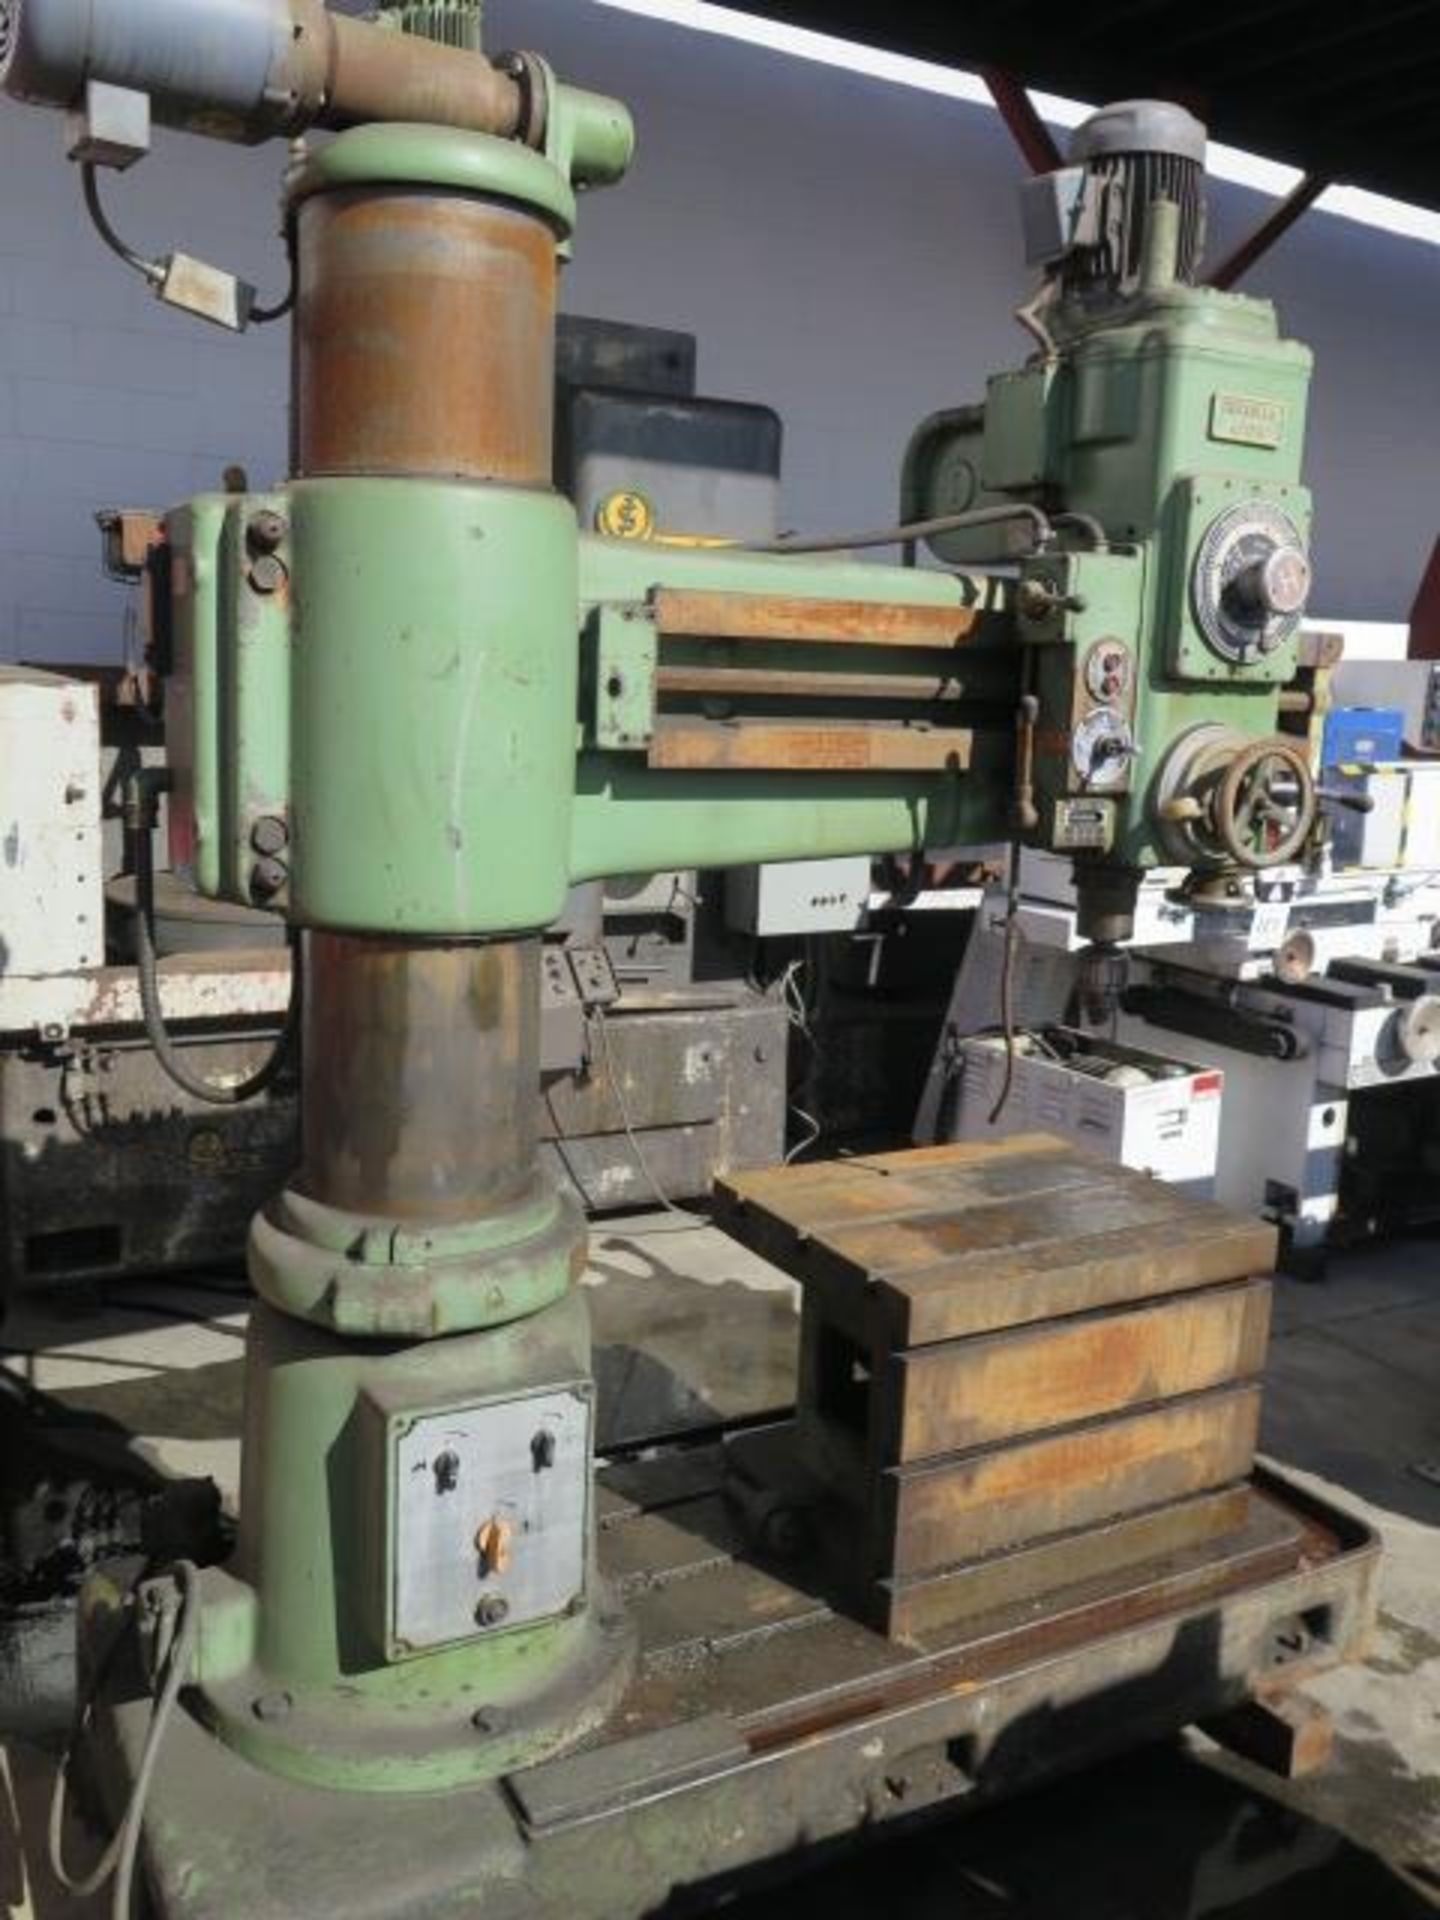 Hercules 4' / 12 1/2" Radial Arm Drill w/ Power Column and Feeds (SOLD AS-IS - NO WARRANTY) - Image 5 of 9